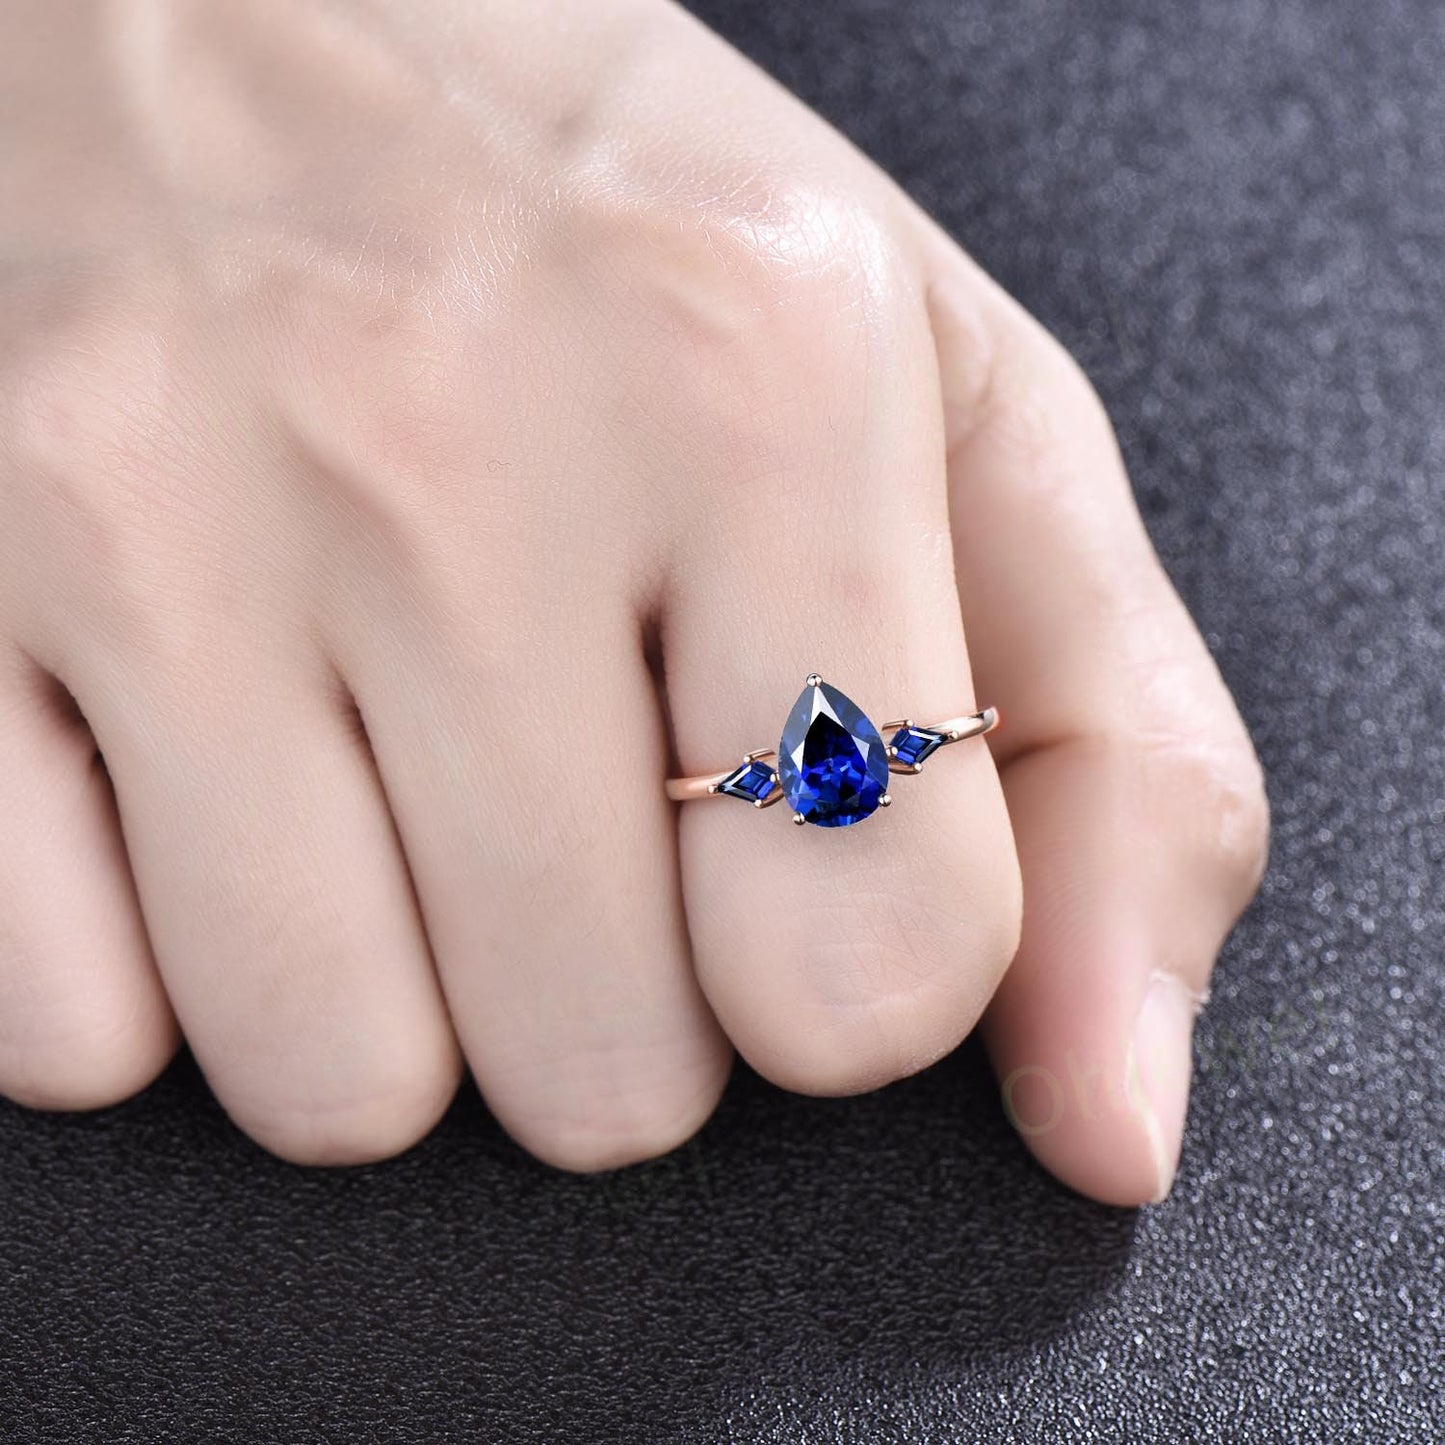 Pear shaped sapphire ring women vintage kite cut sapphire ring three stone unique engagement ring Minimalist rose gold wedding ring gift